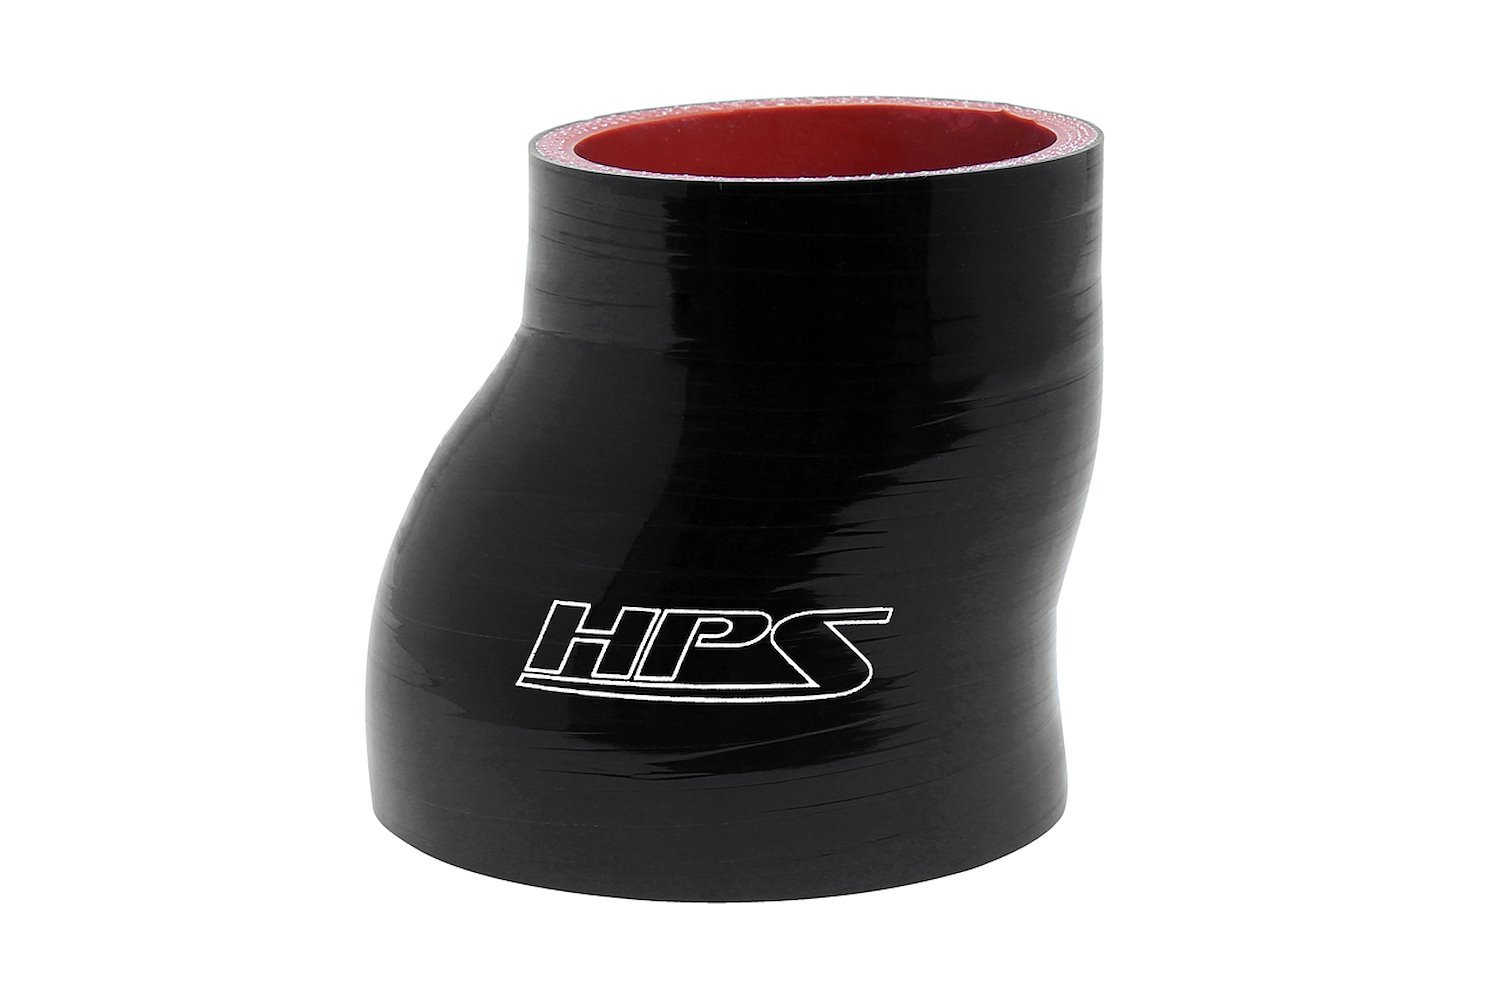 HTSOR-200-250-BLK Silicone Offset Reducer Hose, High-Temp Reinforced, 2 in. - 2-1/2 in. ID, 3 in. Long, Black